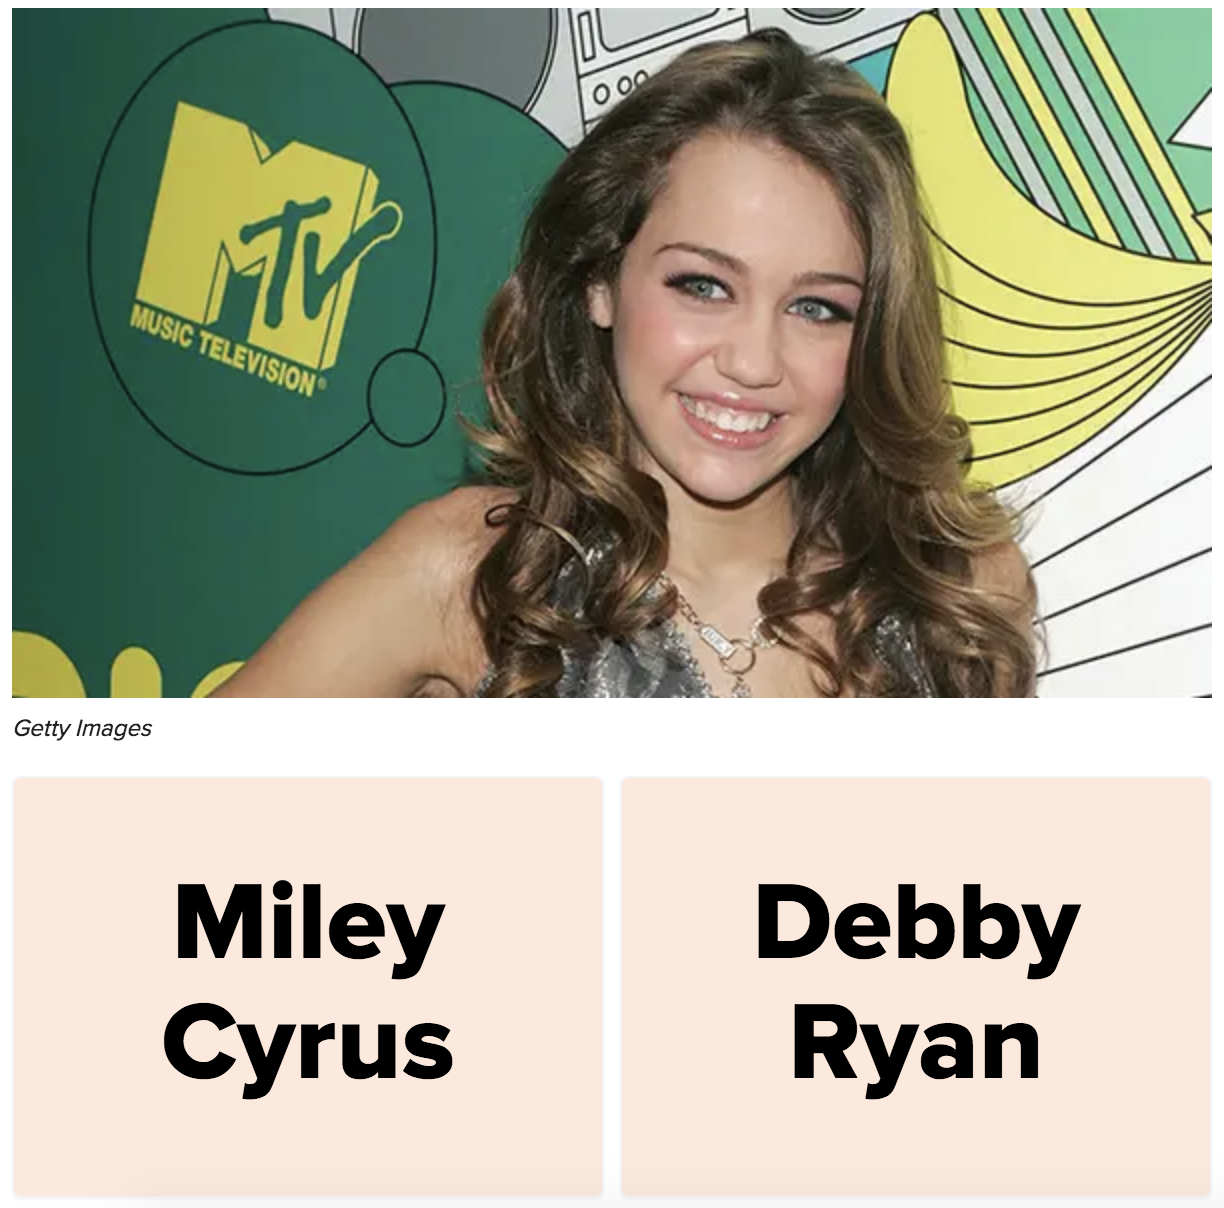 A photo of the star of &quot;Hannah Montana&quot; with quiz options asking if she&#x27;s Miley Cyrus or Debby Ryan